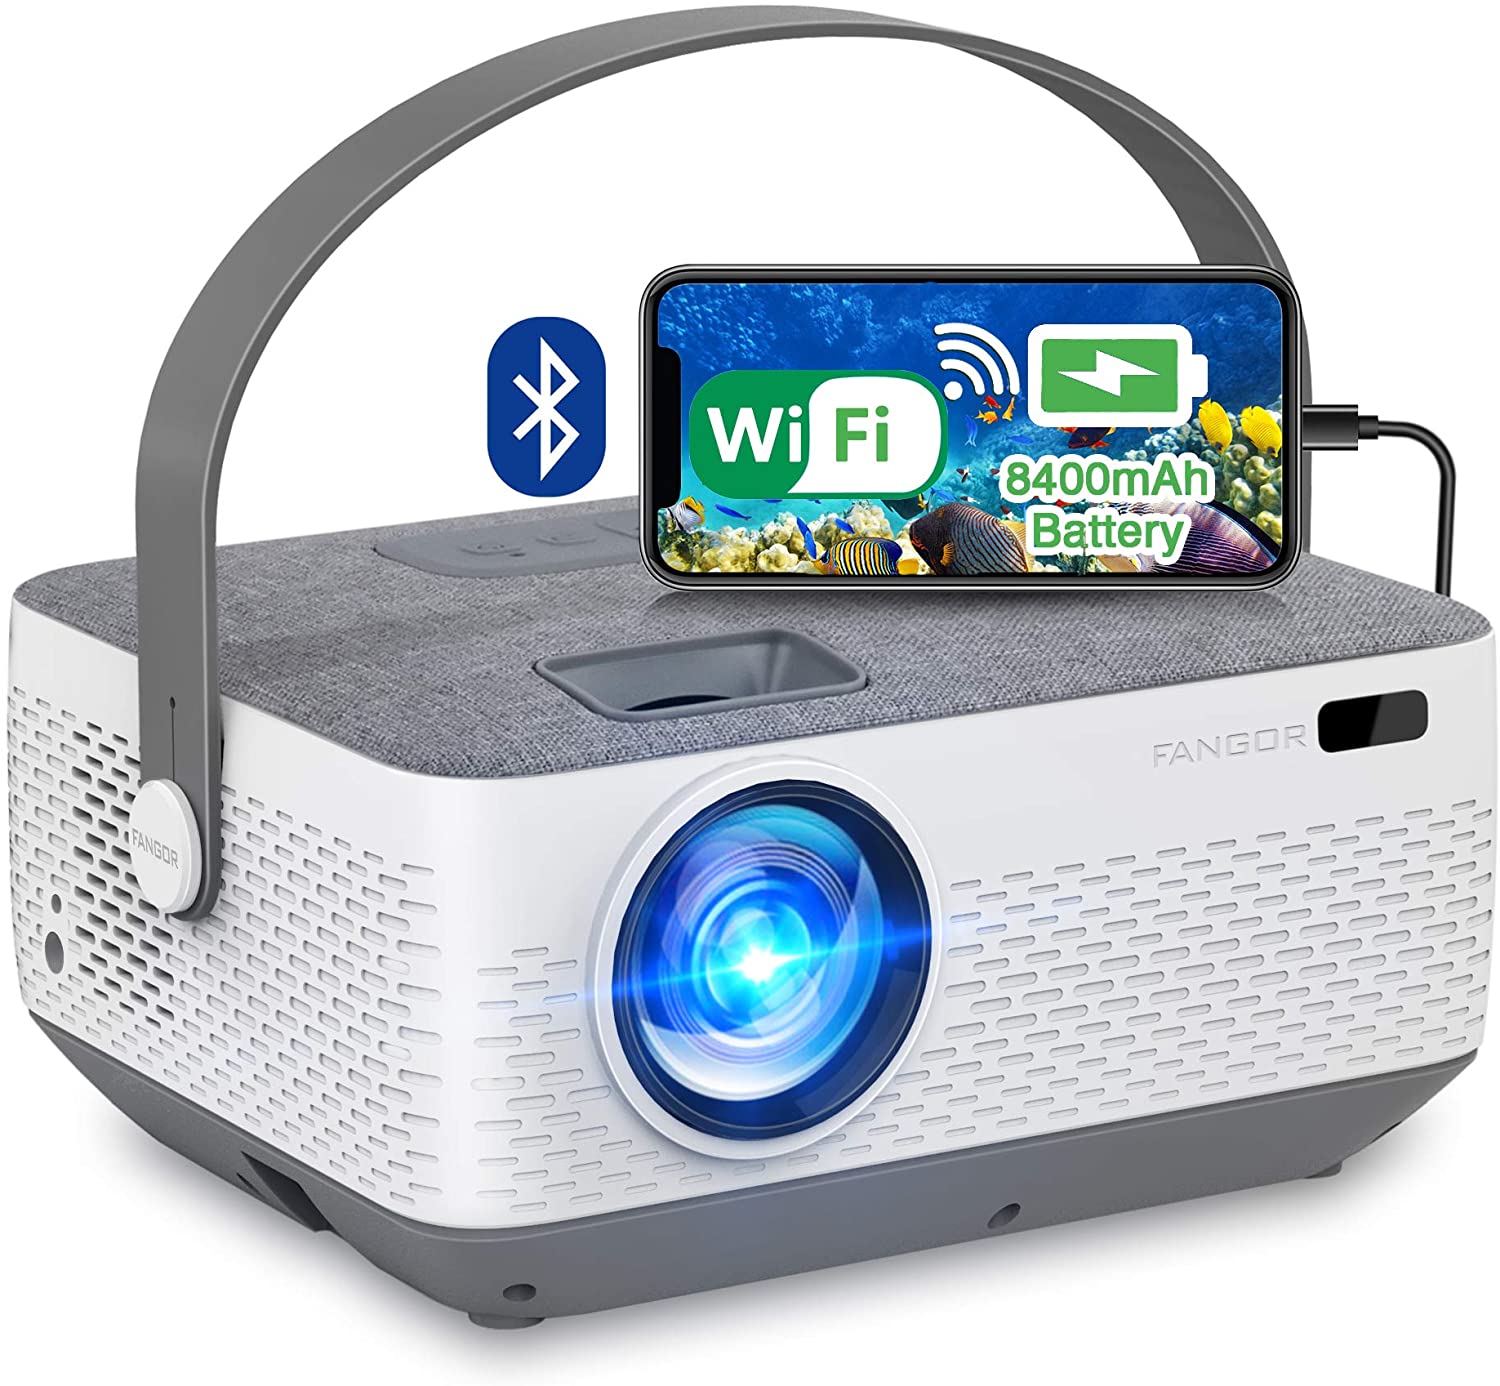 FANGOR 601 WiFi Projector Bluetooth 8400mAh Battery, Rechargeable Portable  Home Projector, 1080P Supported